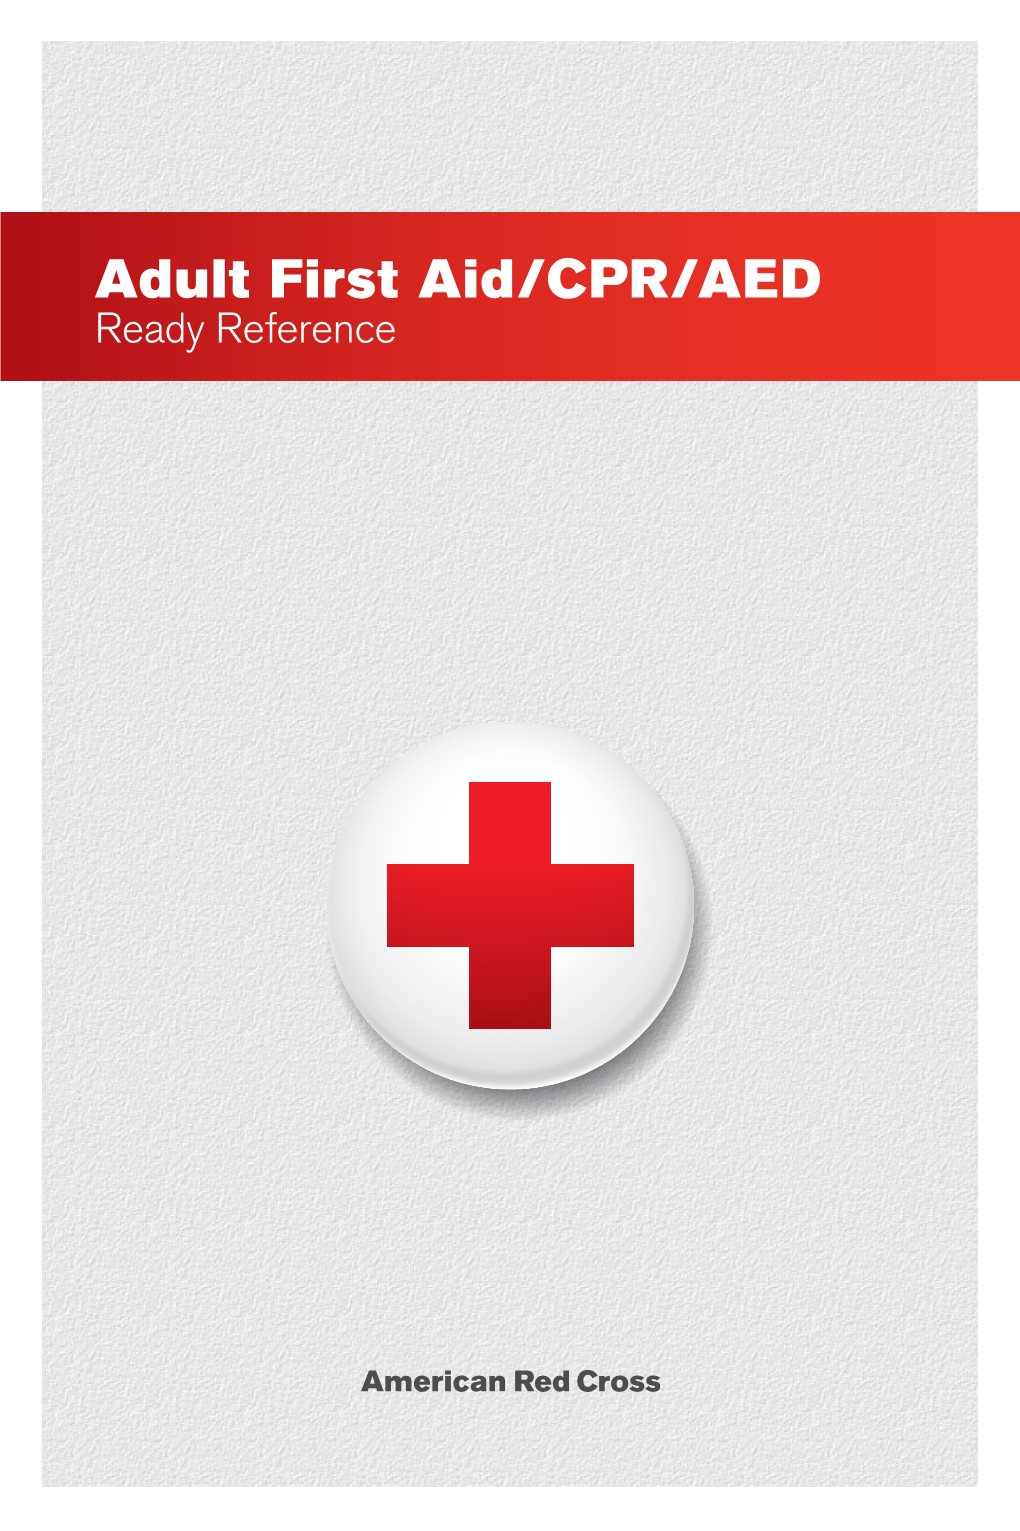 Adult First Aid/CPR/Aed Ready Reference